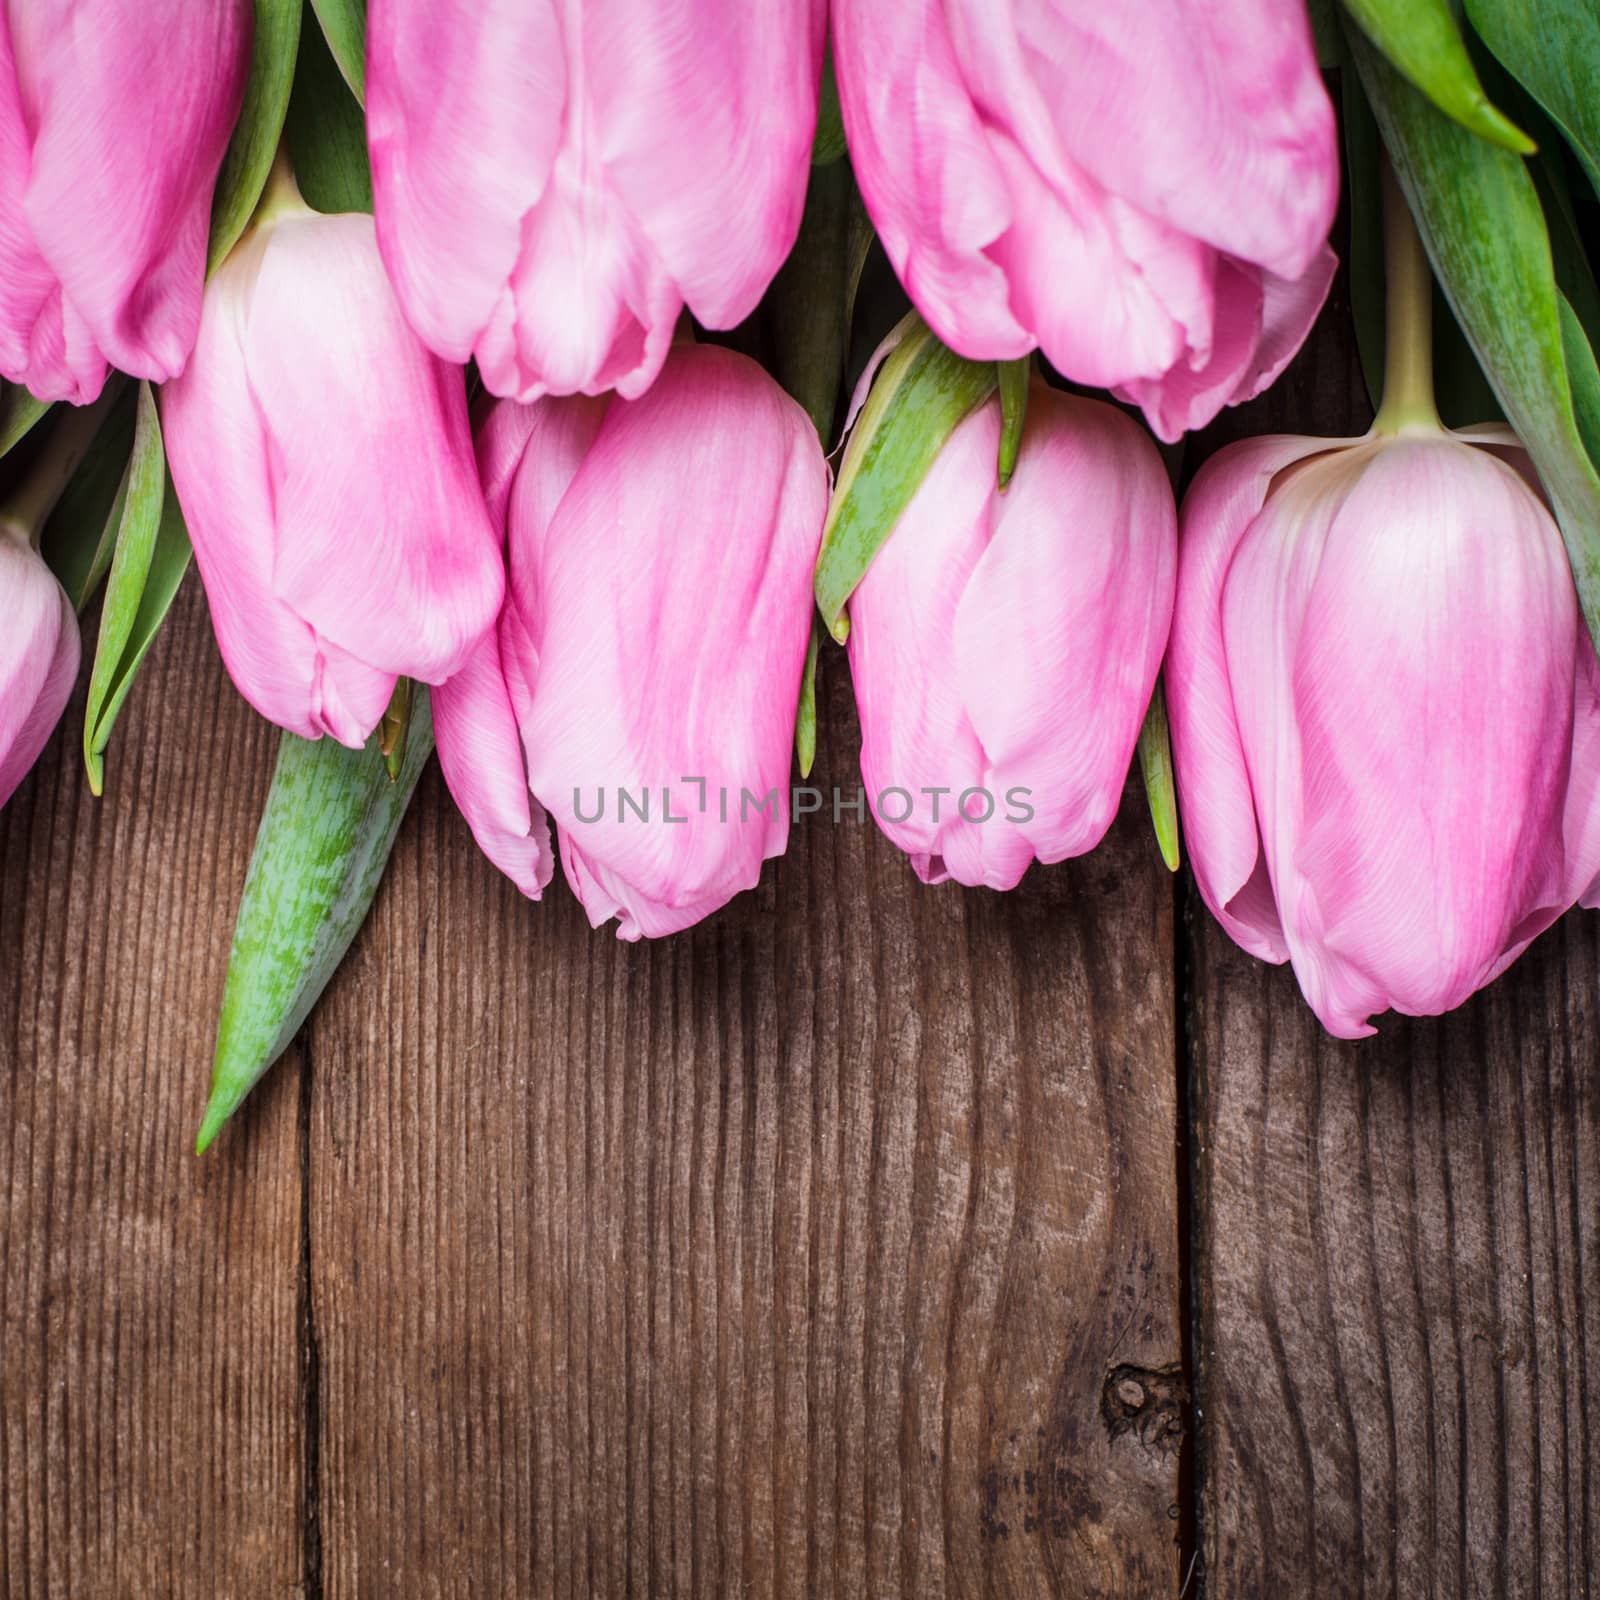 Pink tulips close up over old wooden background